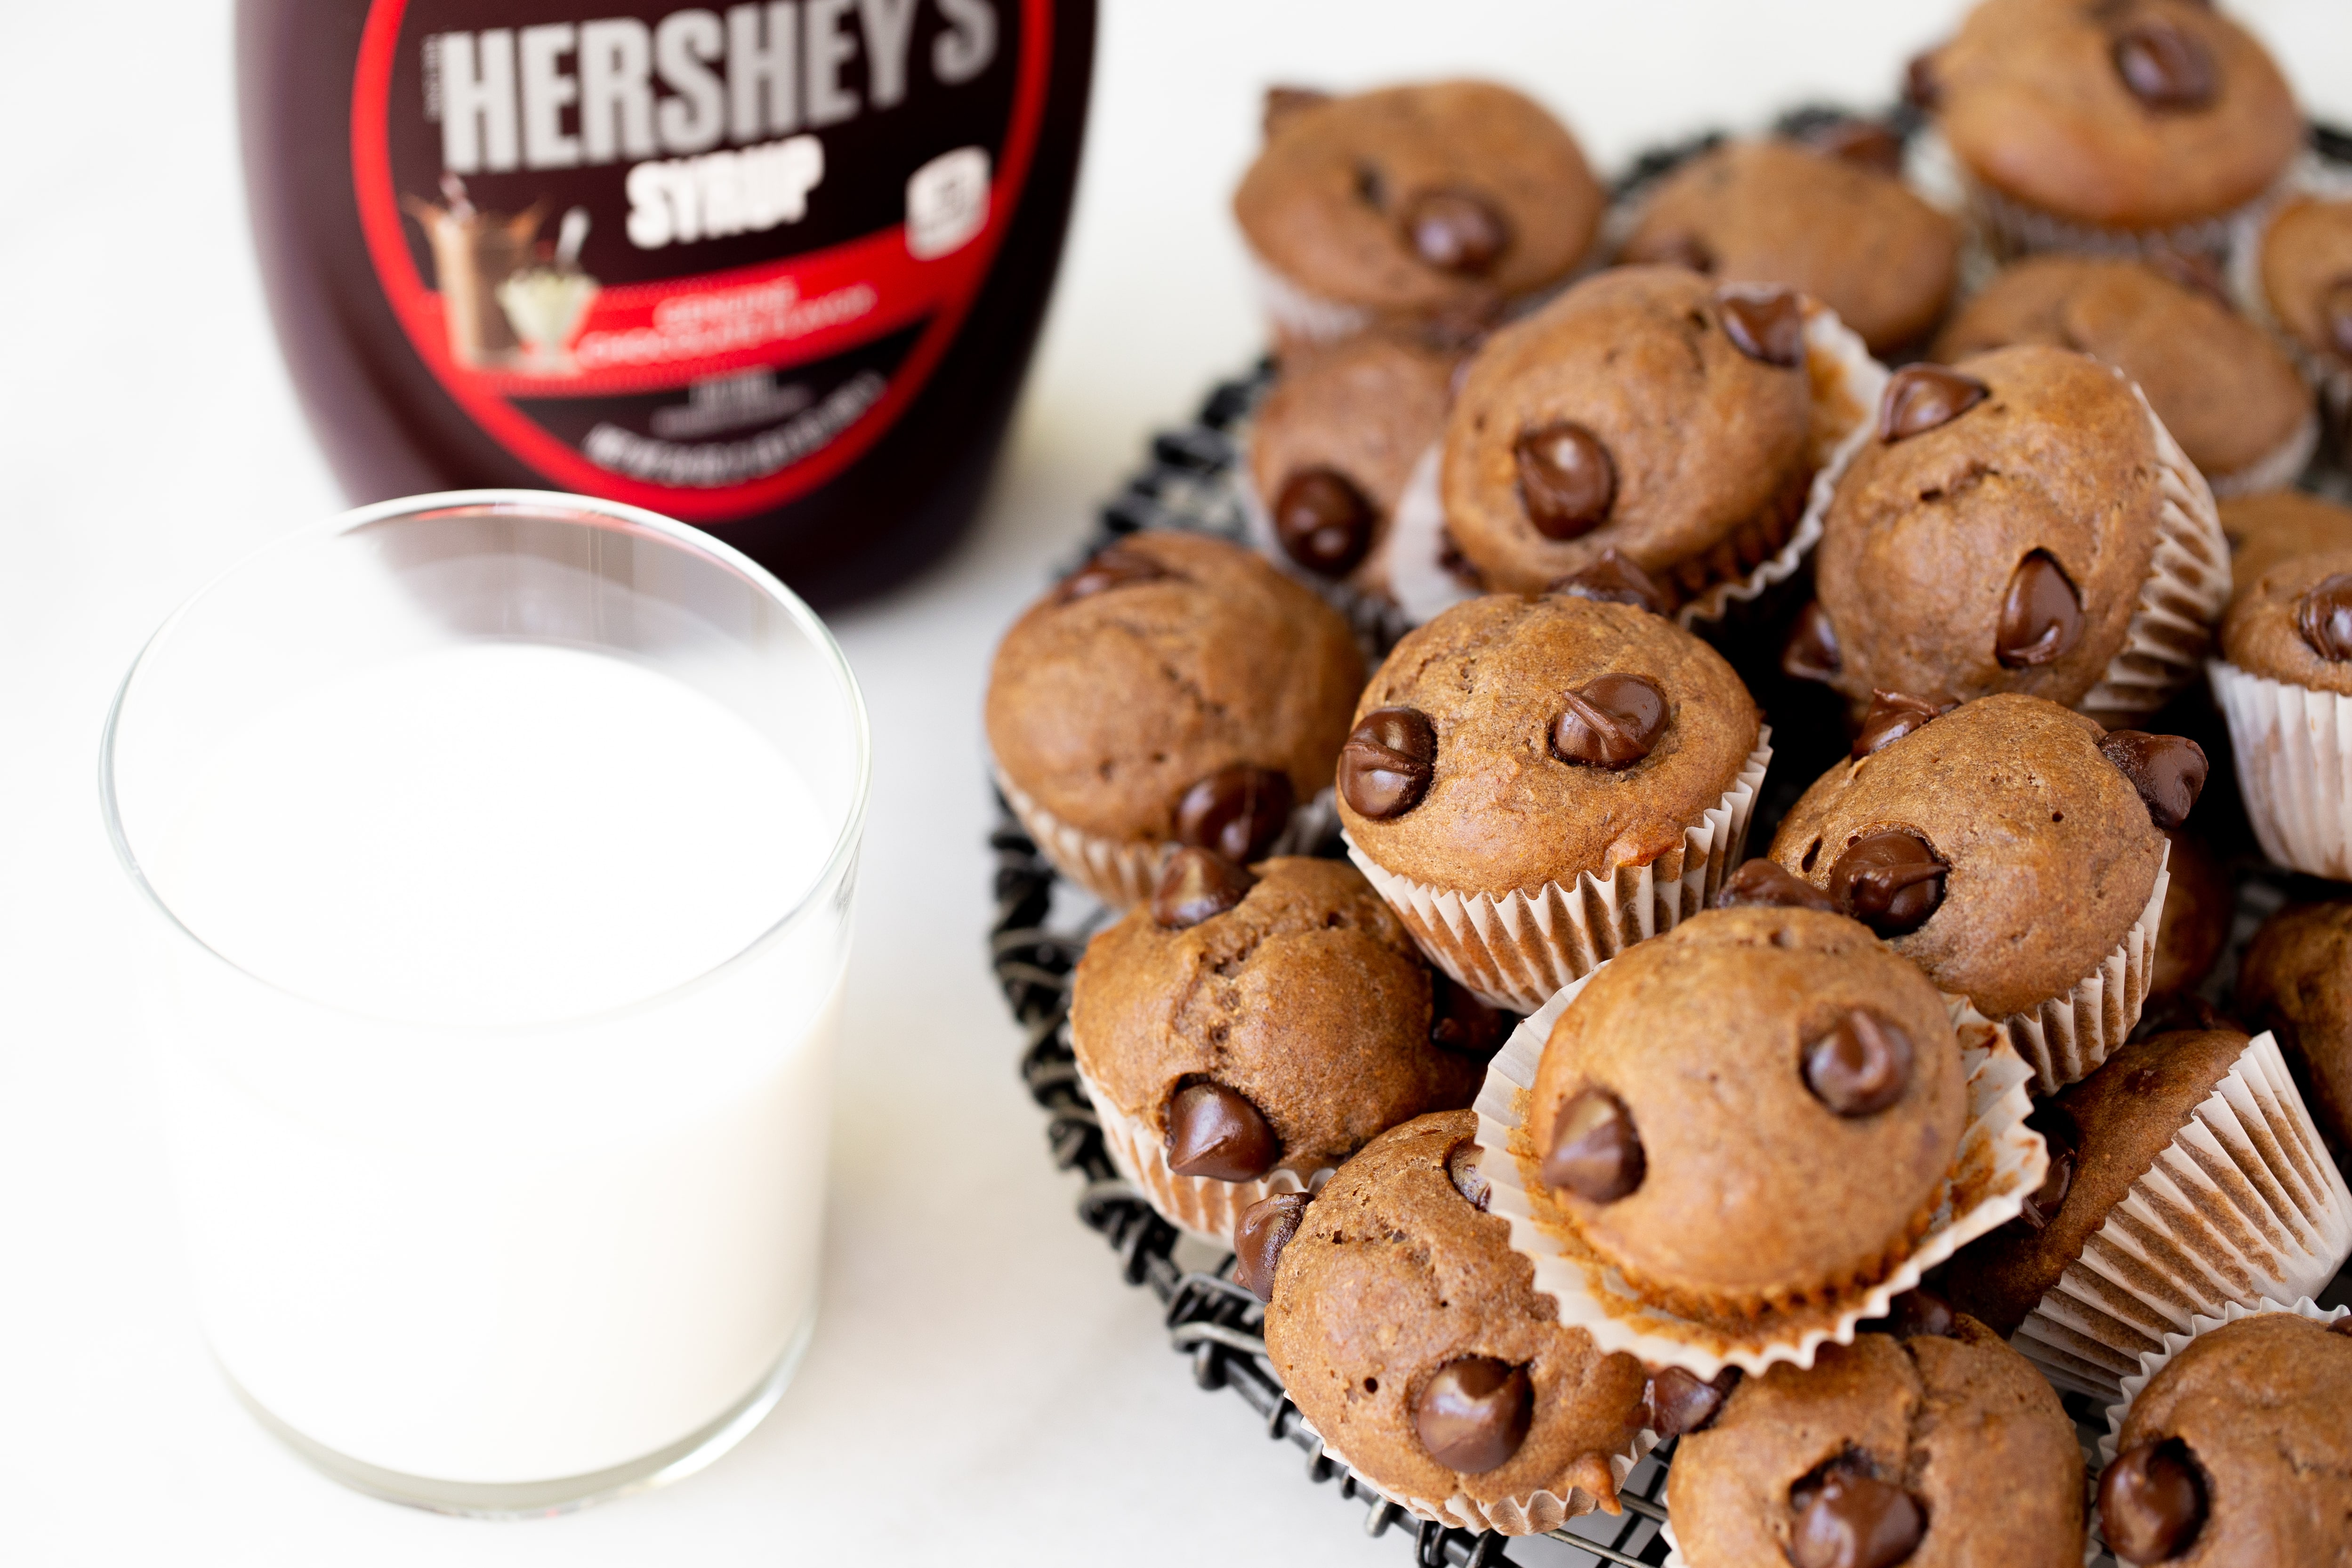 Hershey’s peanut butter banana muffin recipe with a glass of real milk.